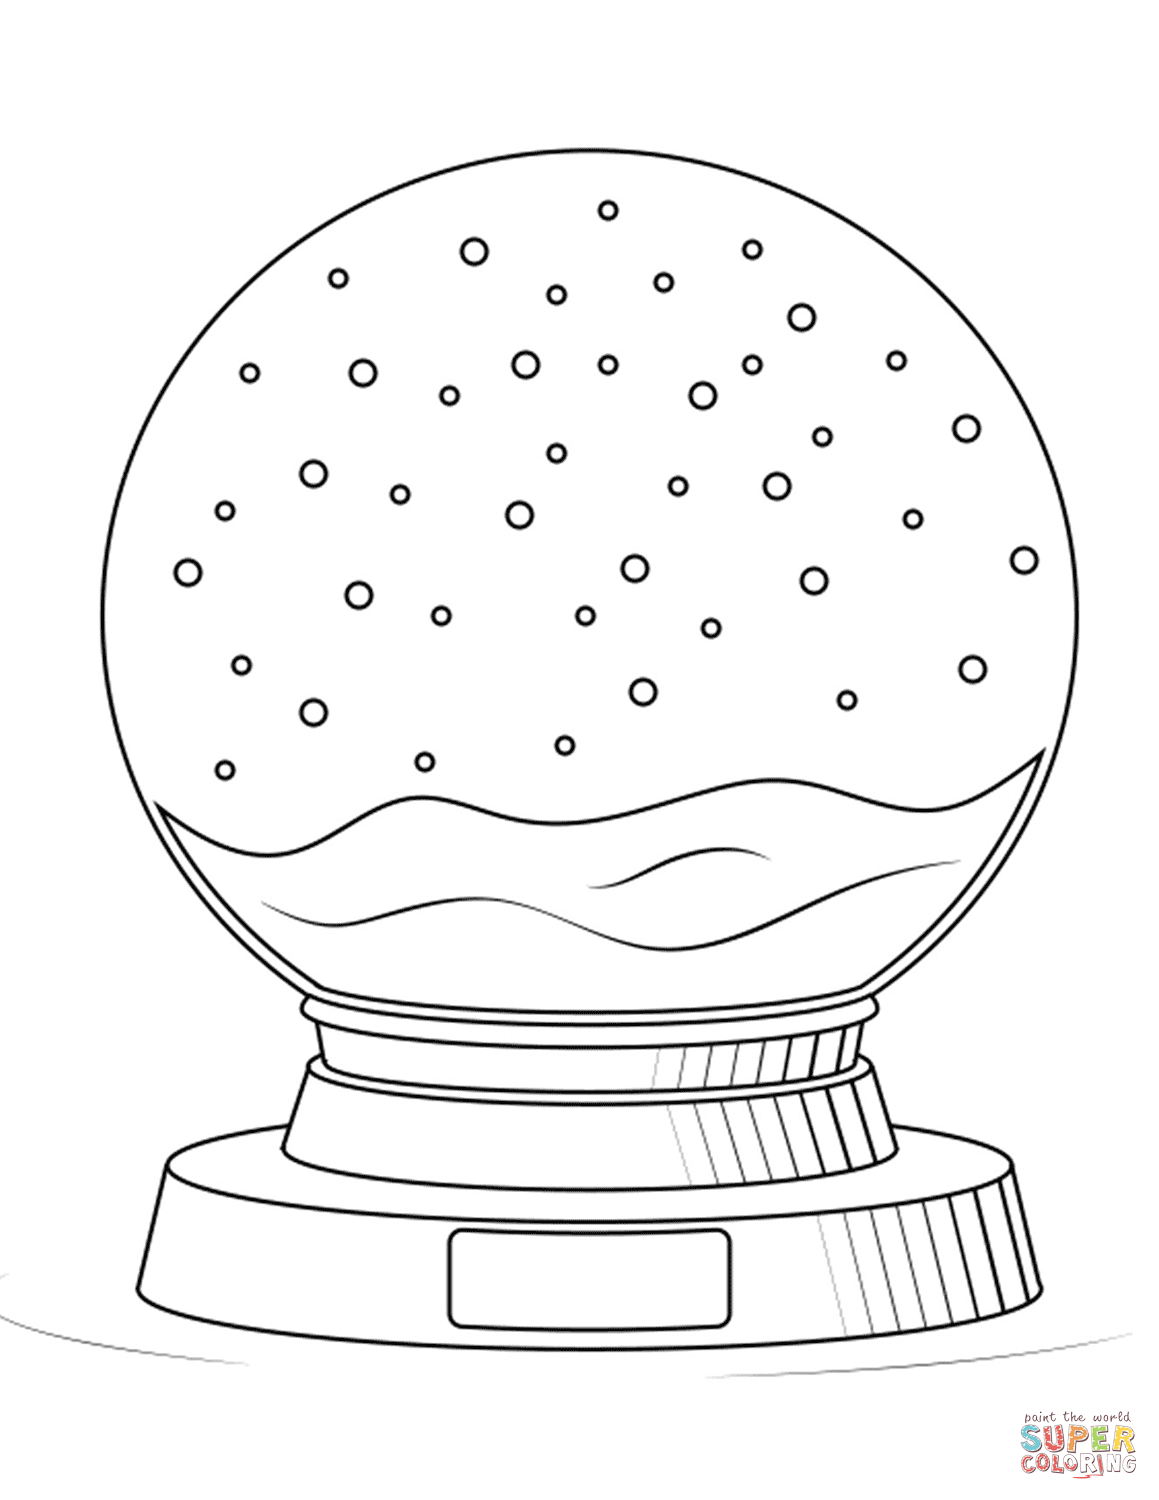 Snow globe coloring page free printable coloring pages